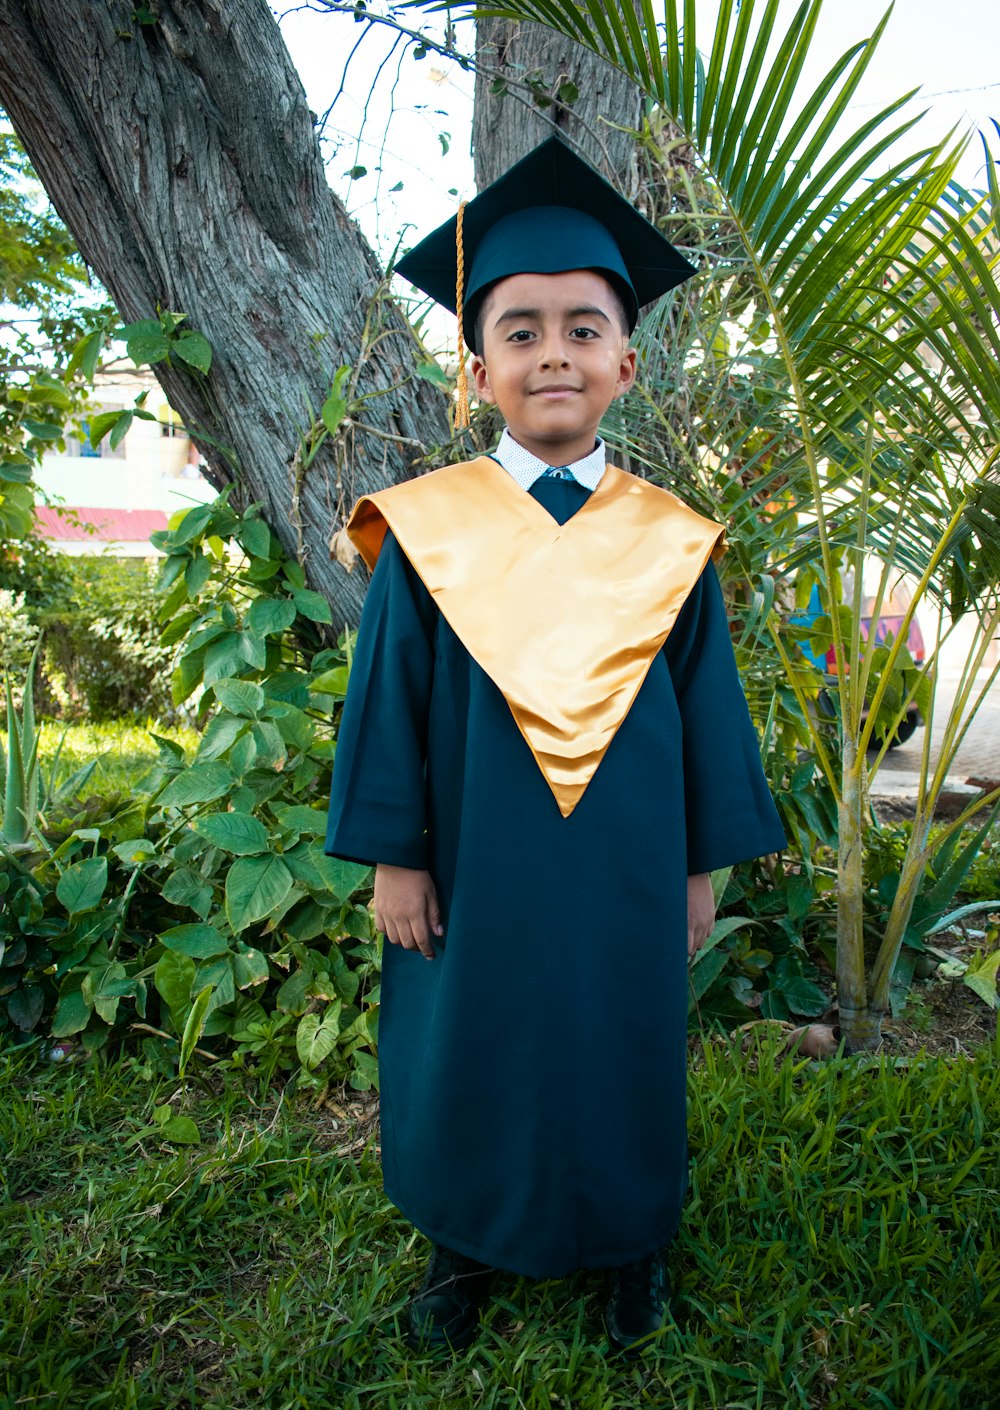 a young boy in a graduation gown and cap